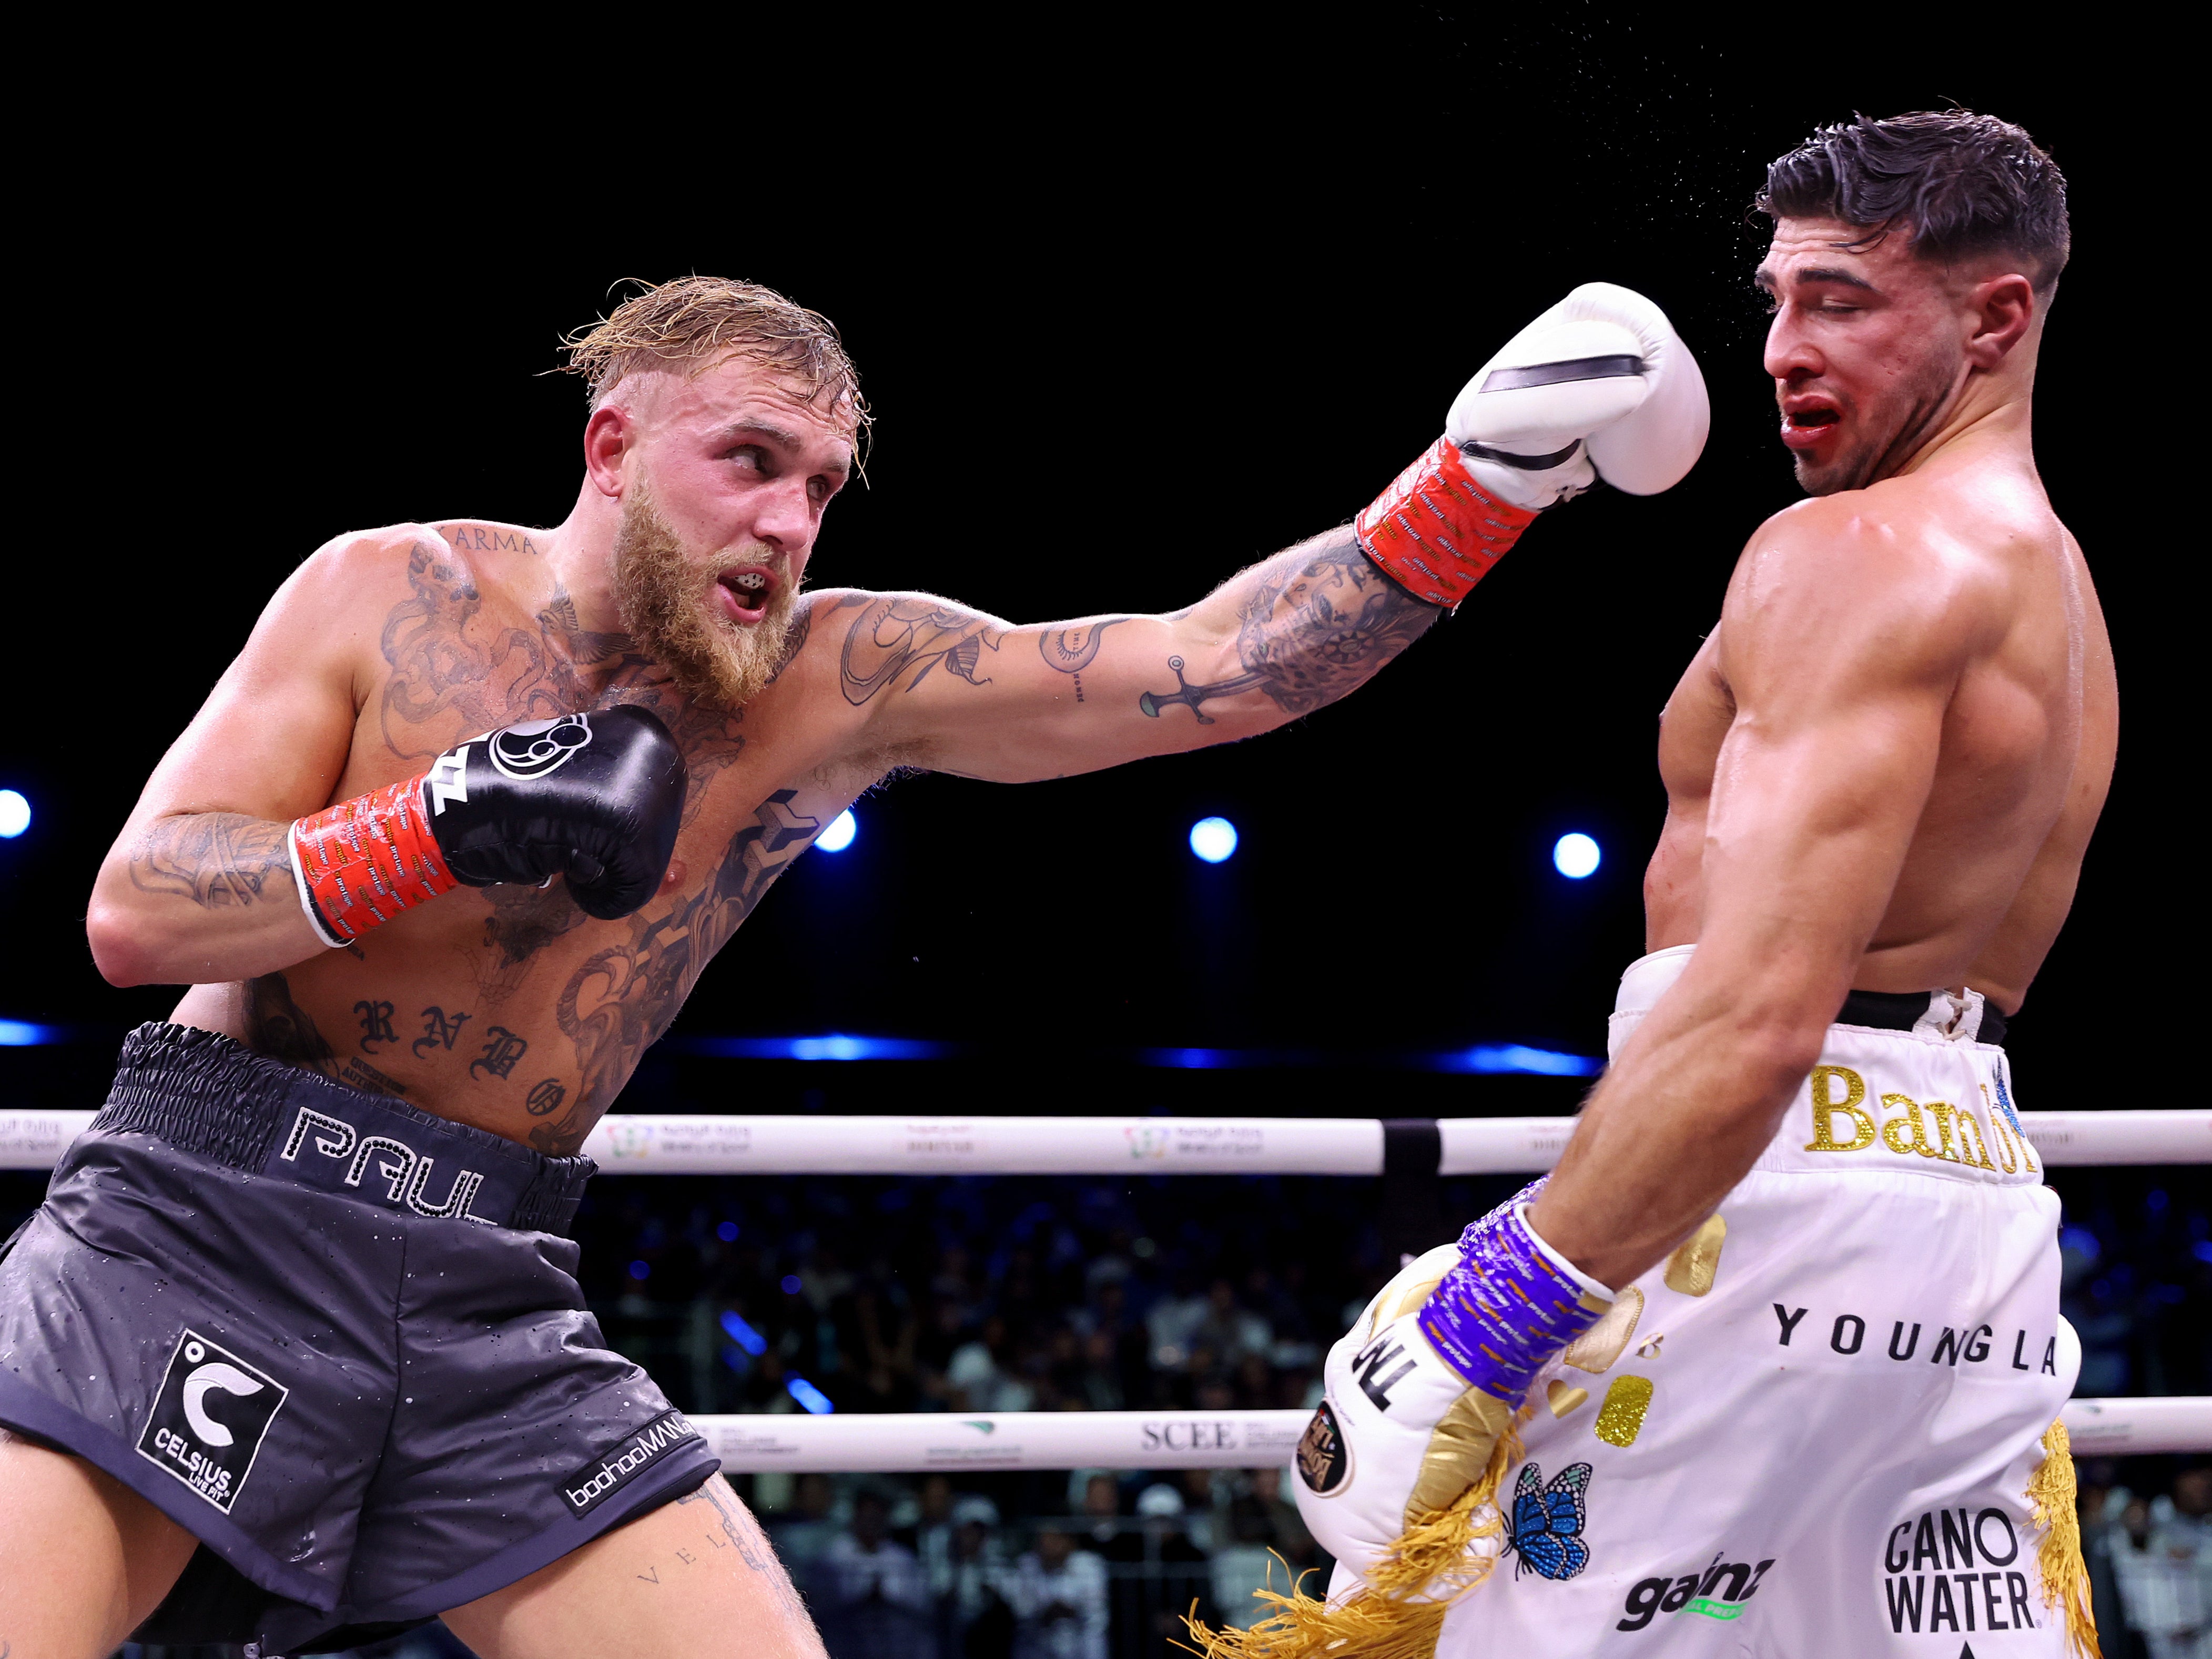 Fury remained unbeaten with the points win, as Paul suffered a first loss